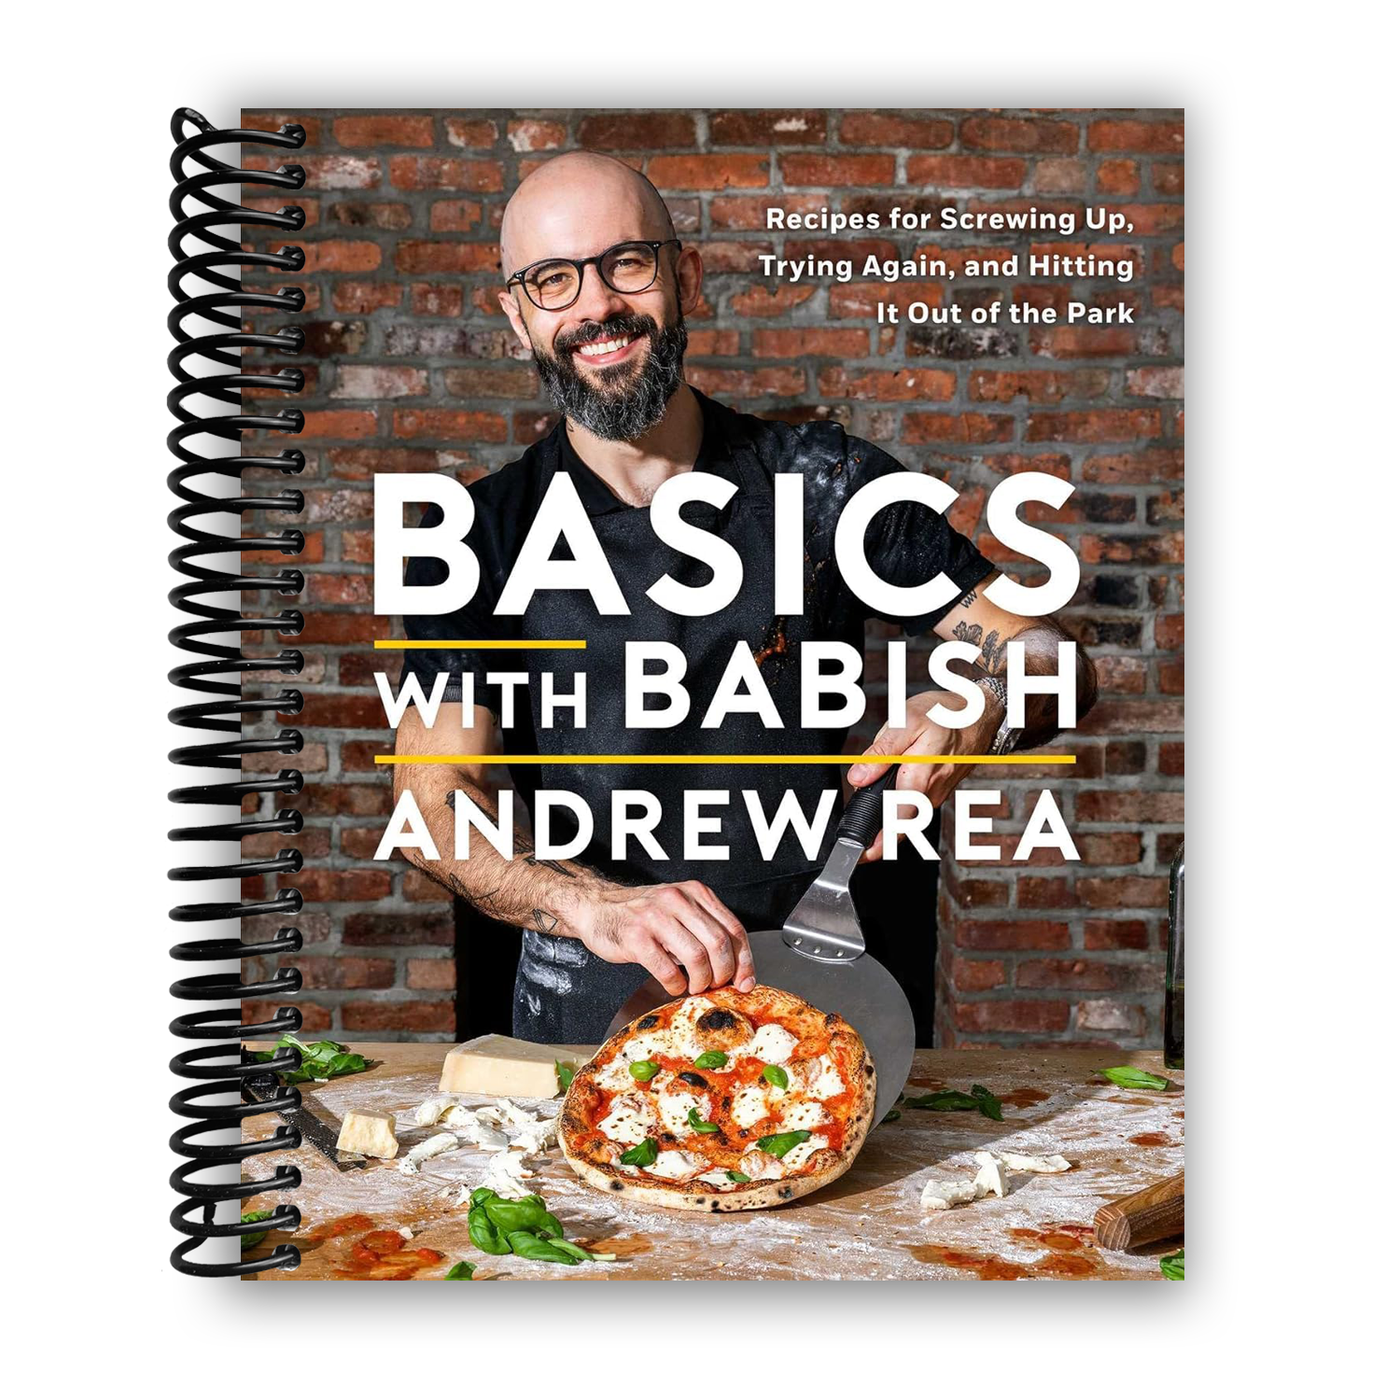 Basics with Babish: Recipes for Screwing Up, Trying Again, and Hitting It Out of the Park (Spiral Bound)